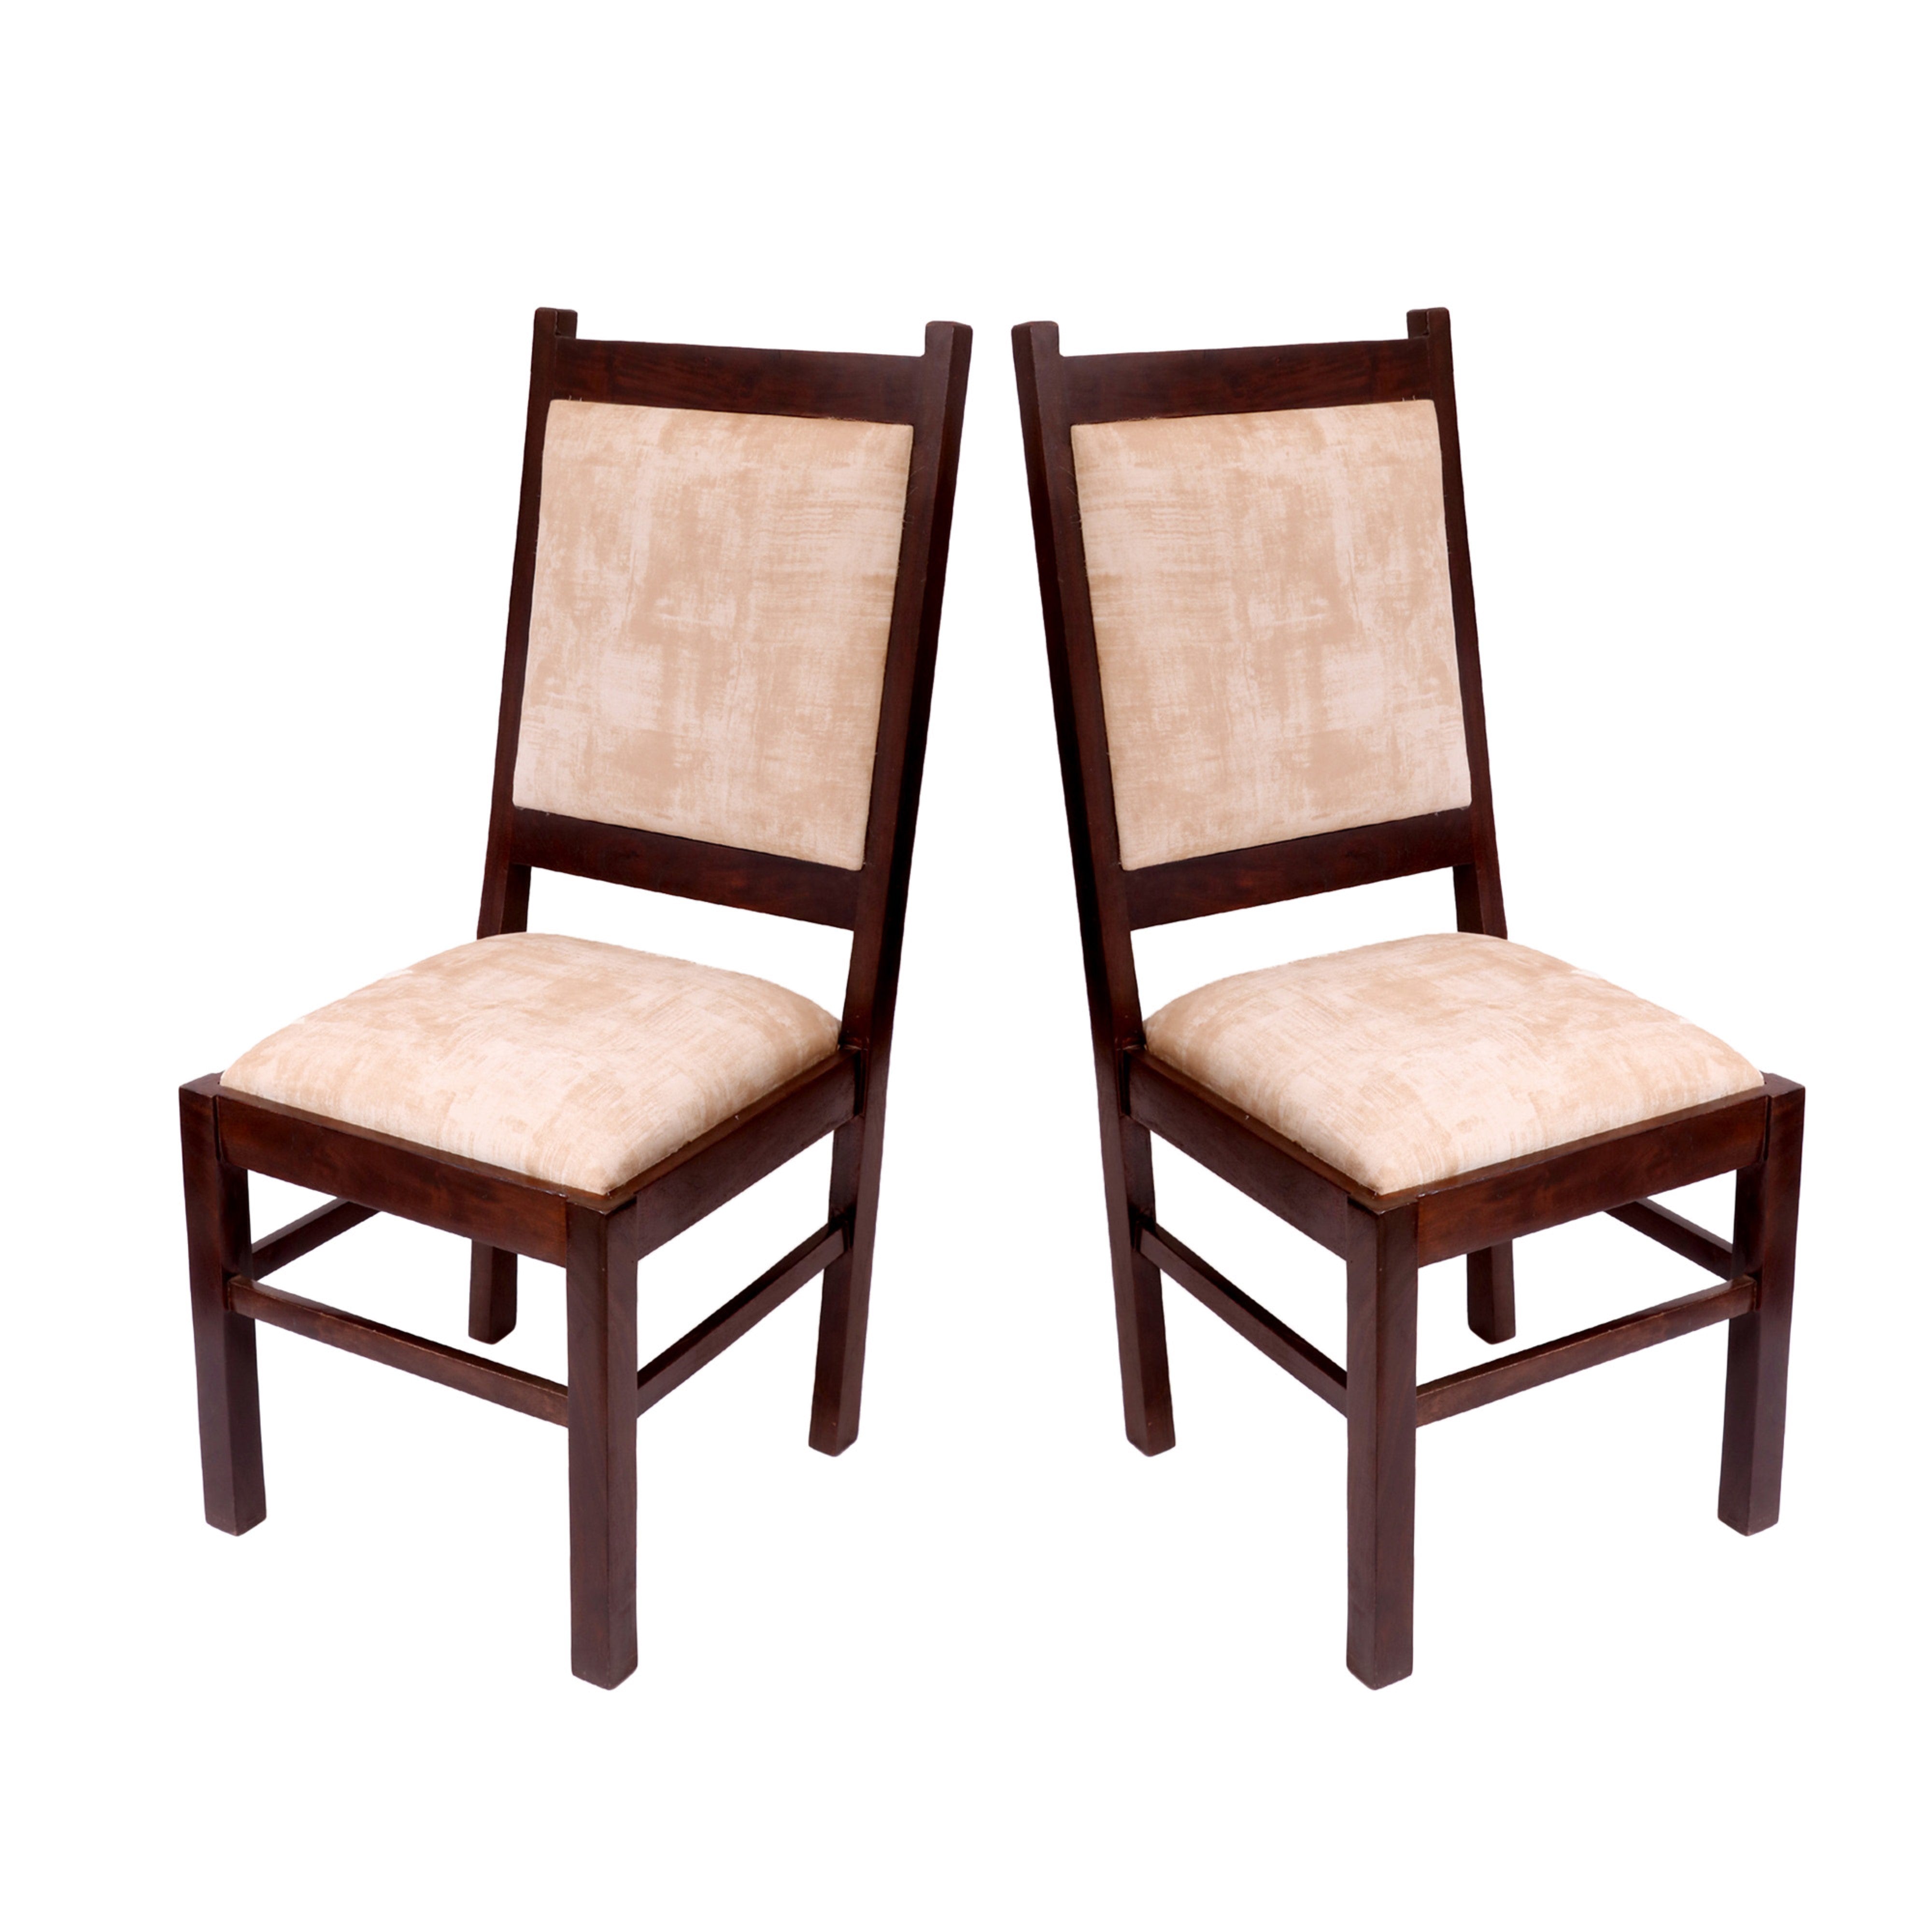 (Set of 2) Plan 2 Side Relief Chair Dining Chair